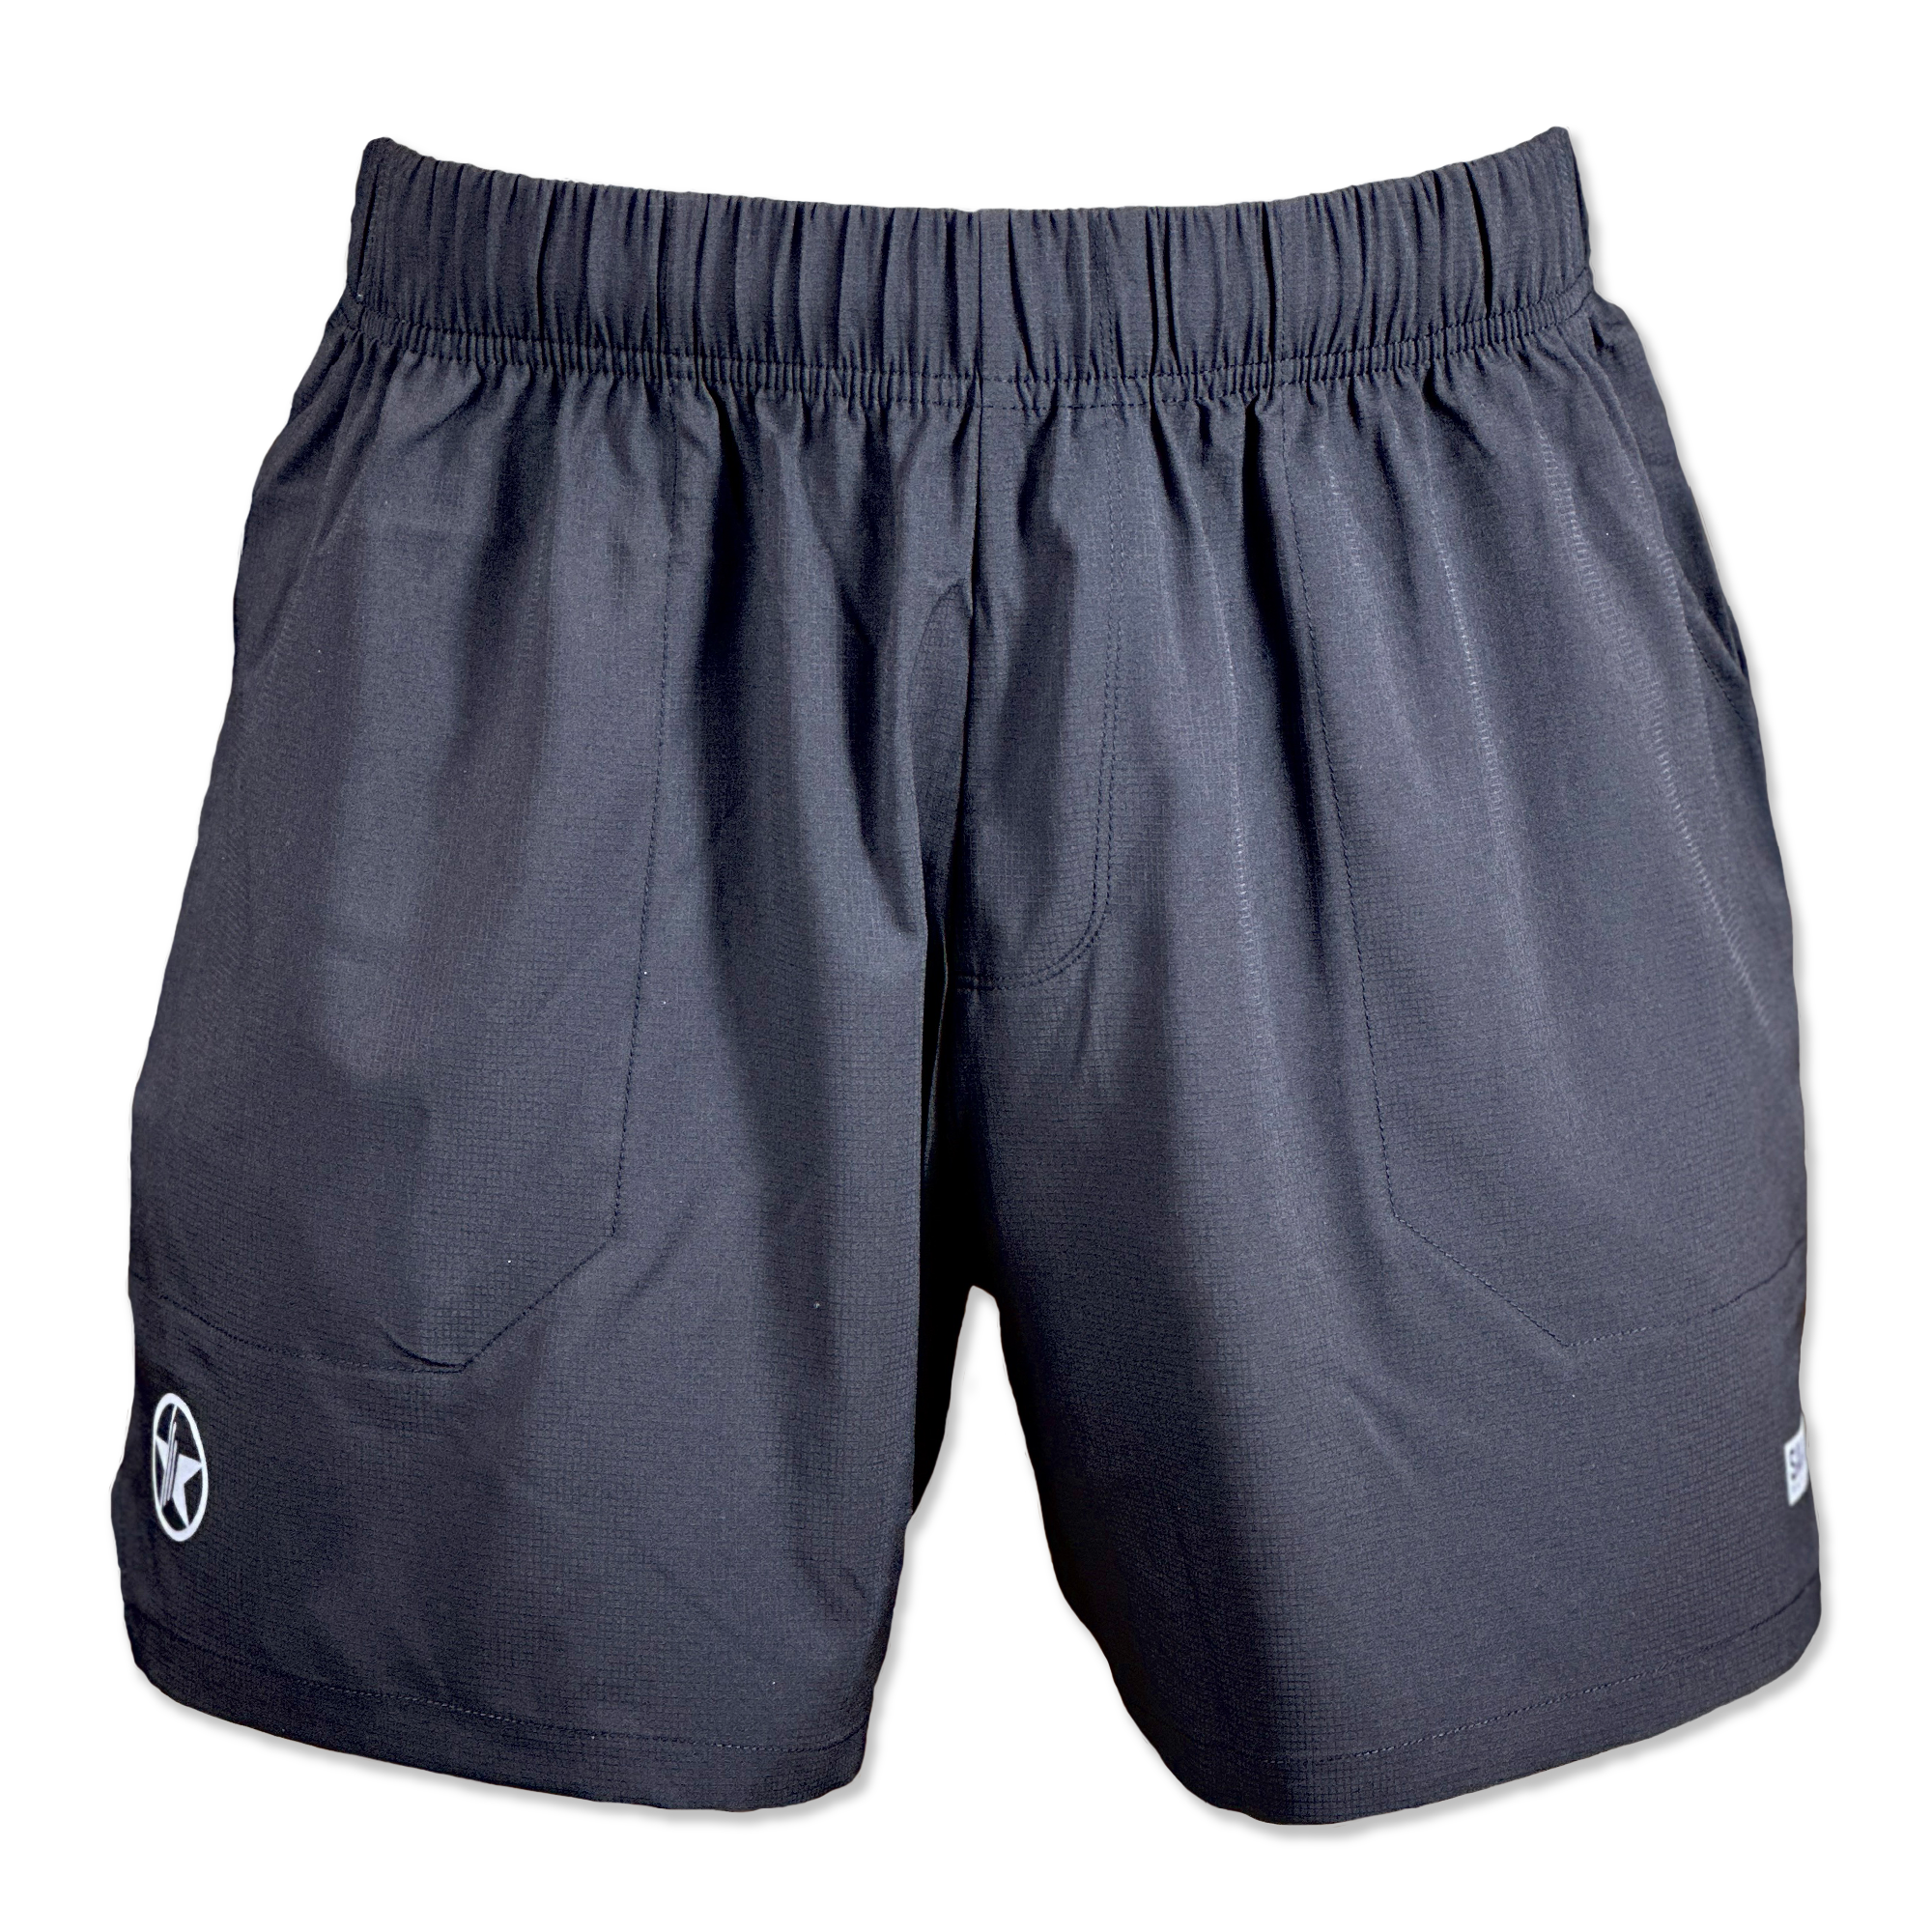 Image of Men's Shorts - Competition 3.0 - Black